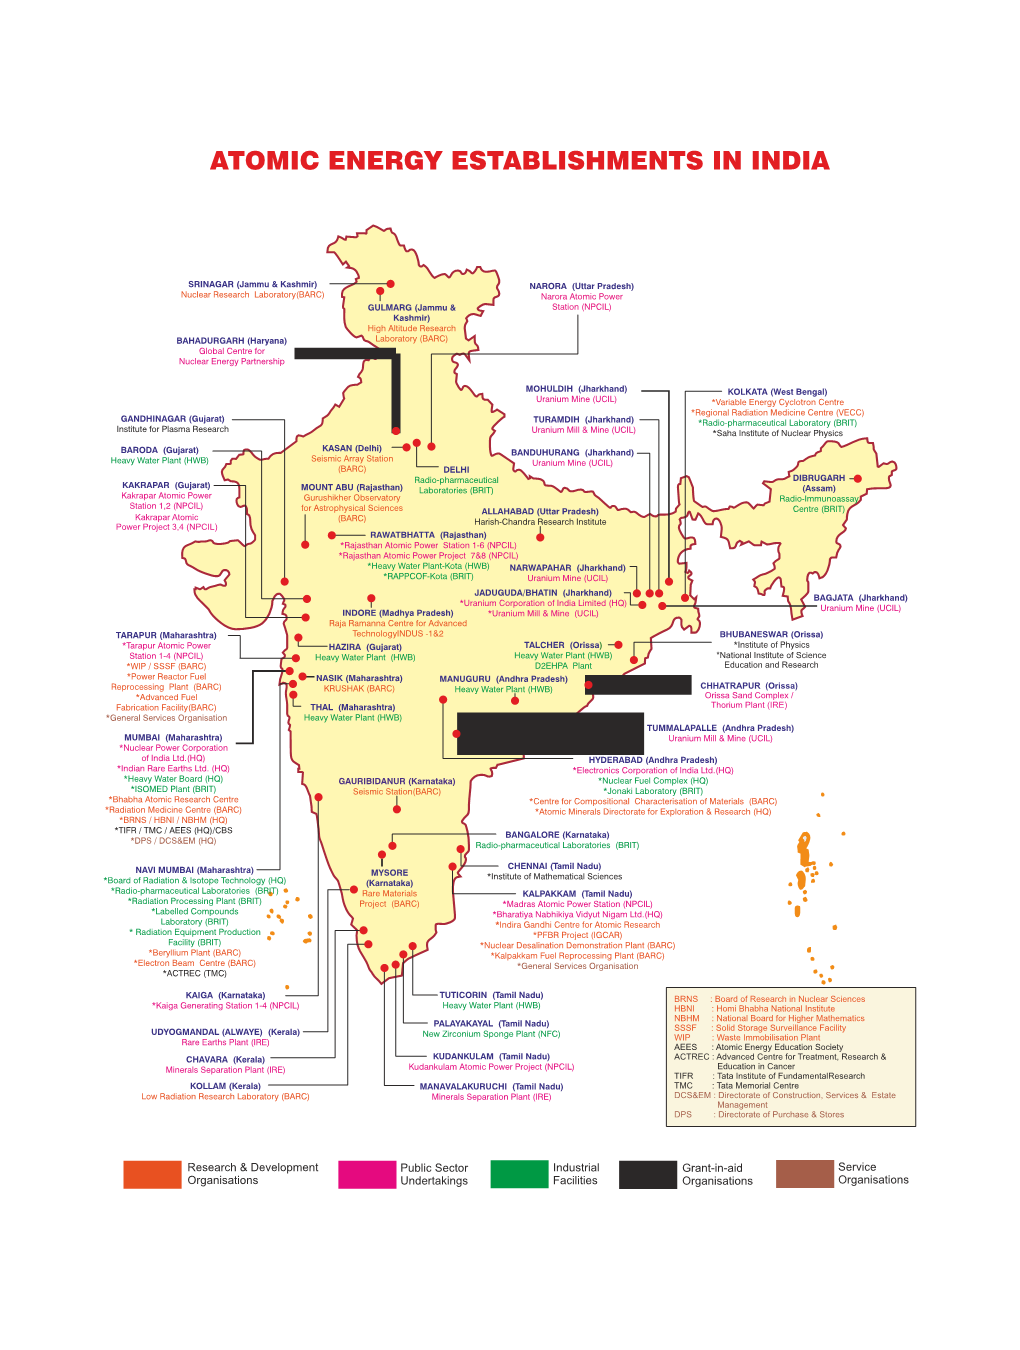 Nuclear Facilities in India